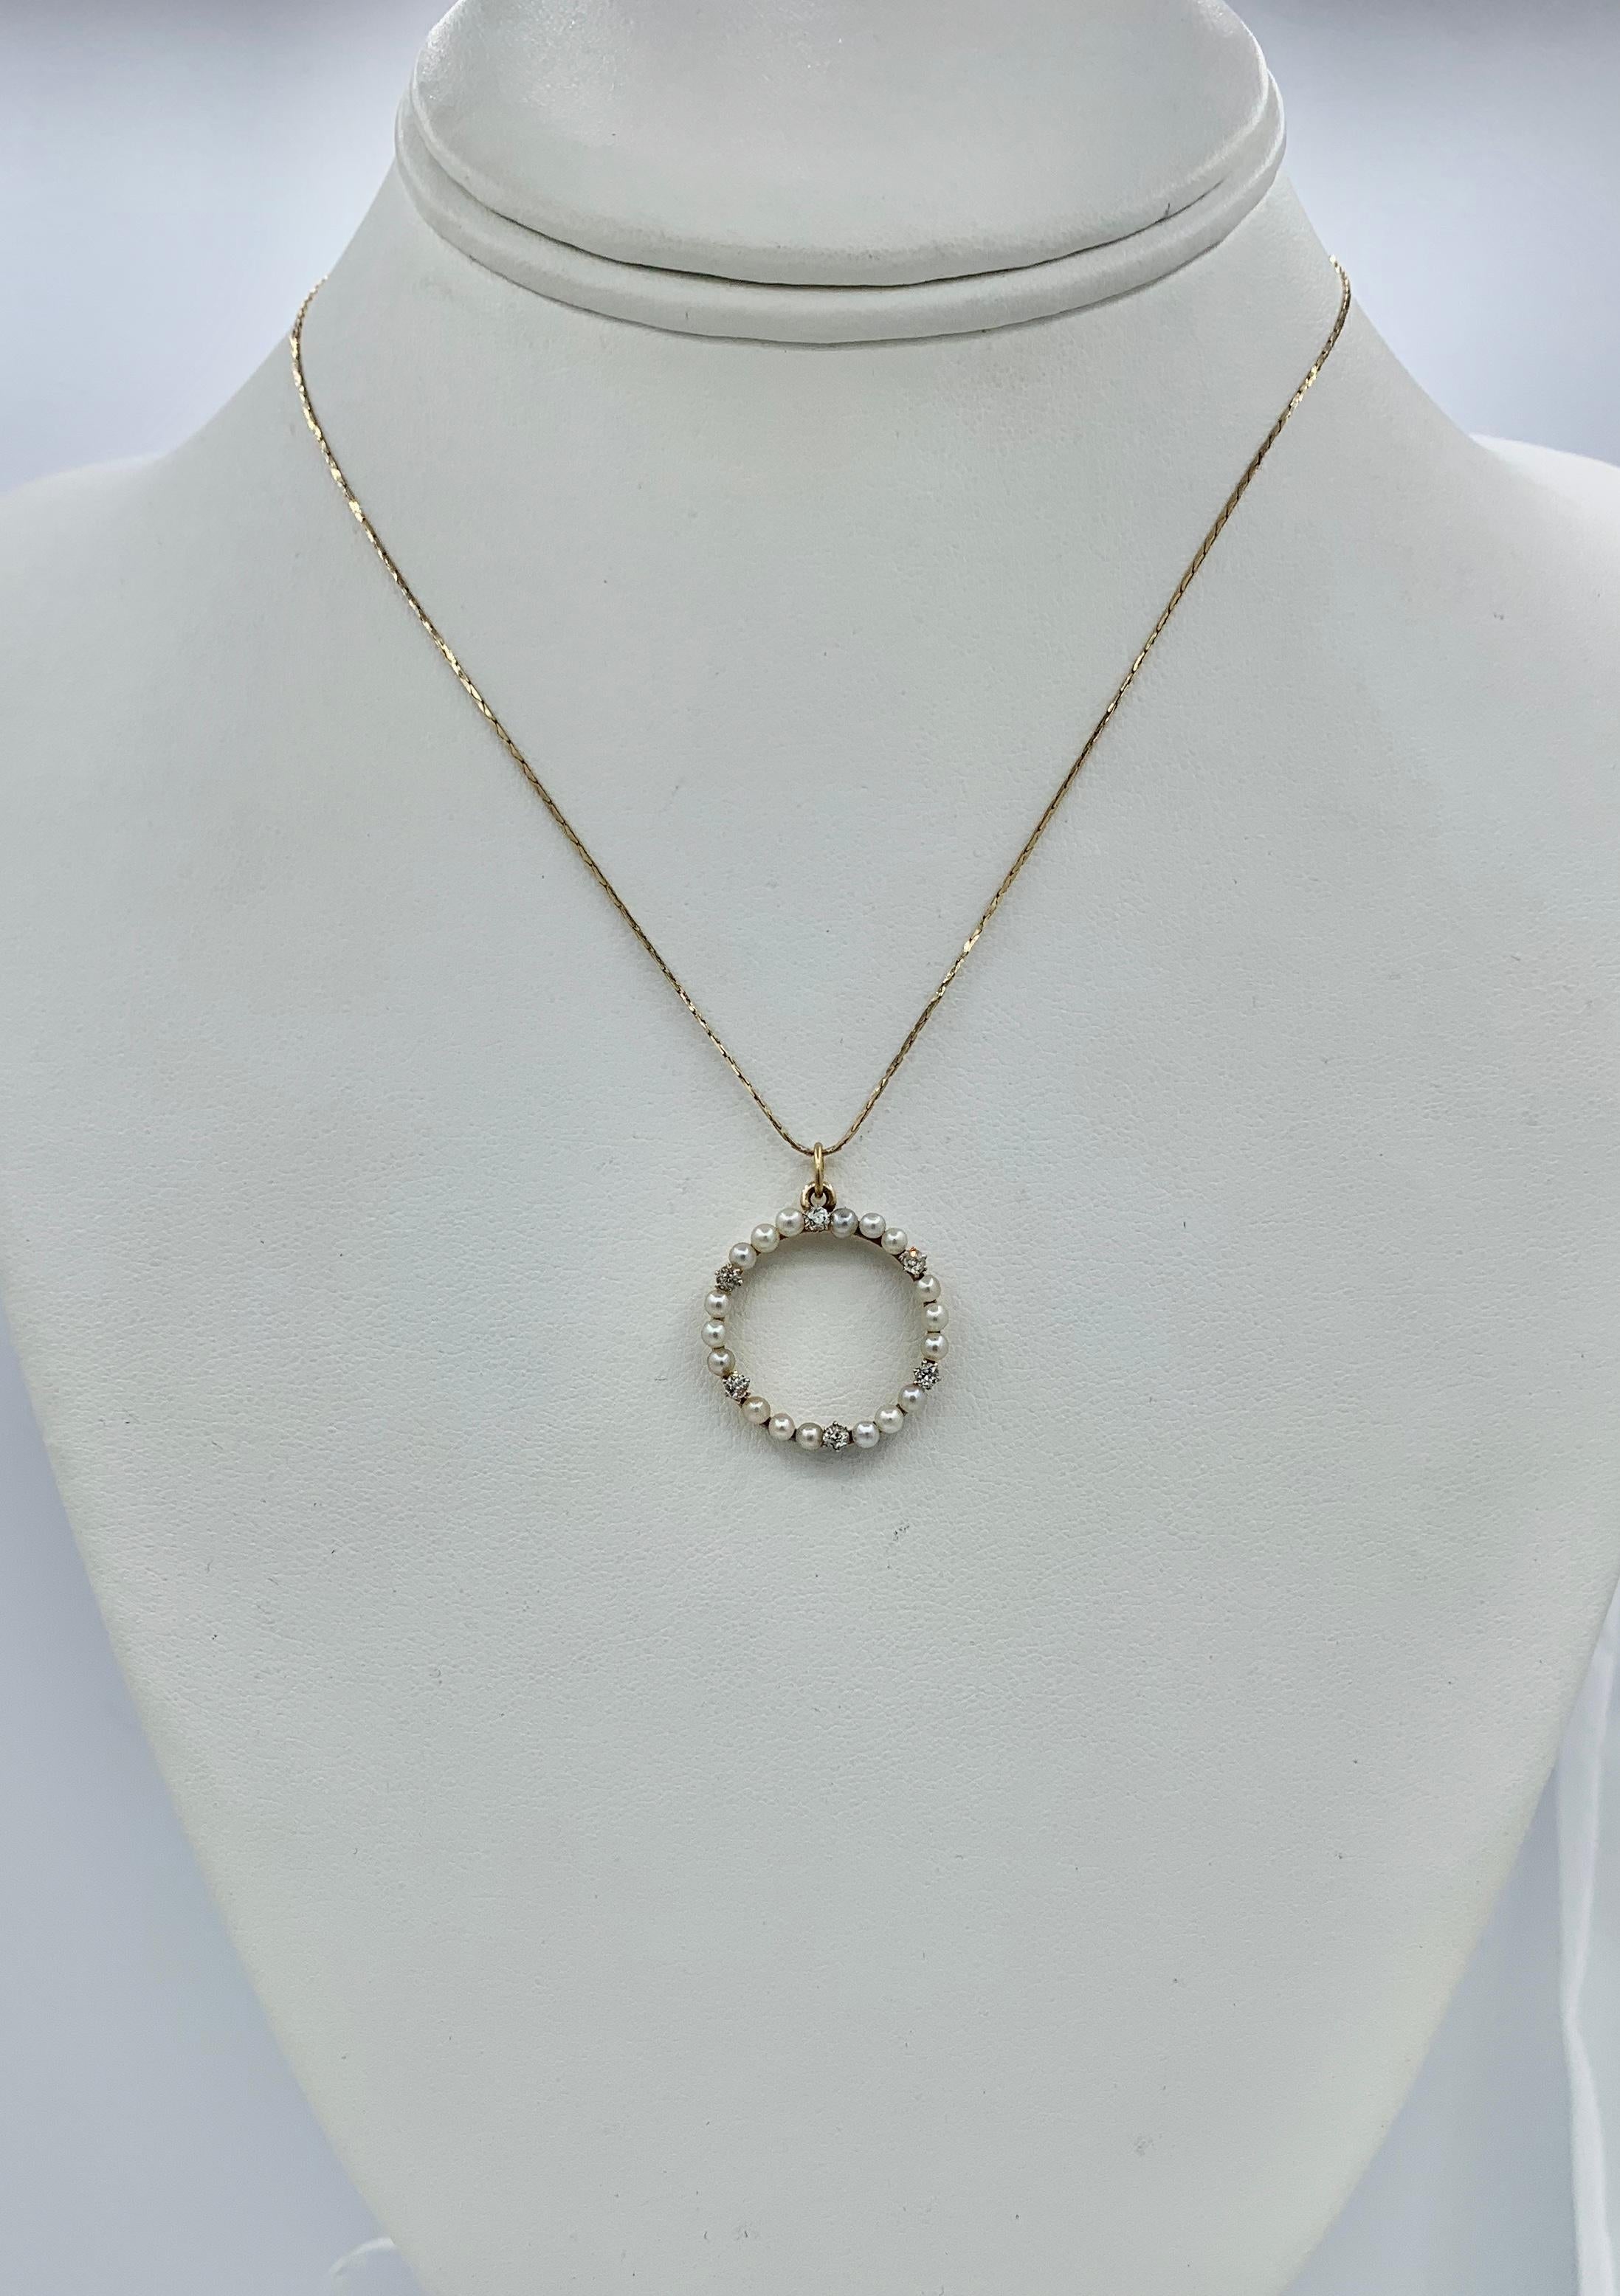 This is a beautiful antique Old Mine Cut Diamond and Pearl Victorian - Art Deco Circle Pendant.  The pendant is set with six Old Mine Cut Diamonds of lovely quality. The diamonds alternate with sets of three silvery white pearls.  The diamonds and